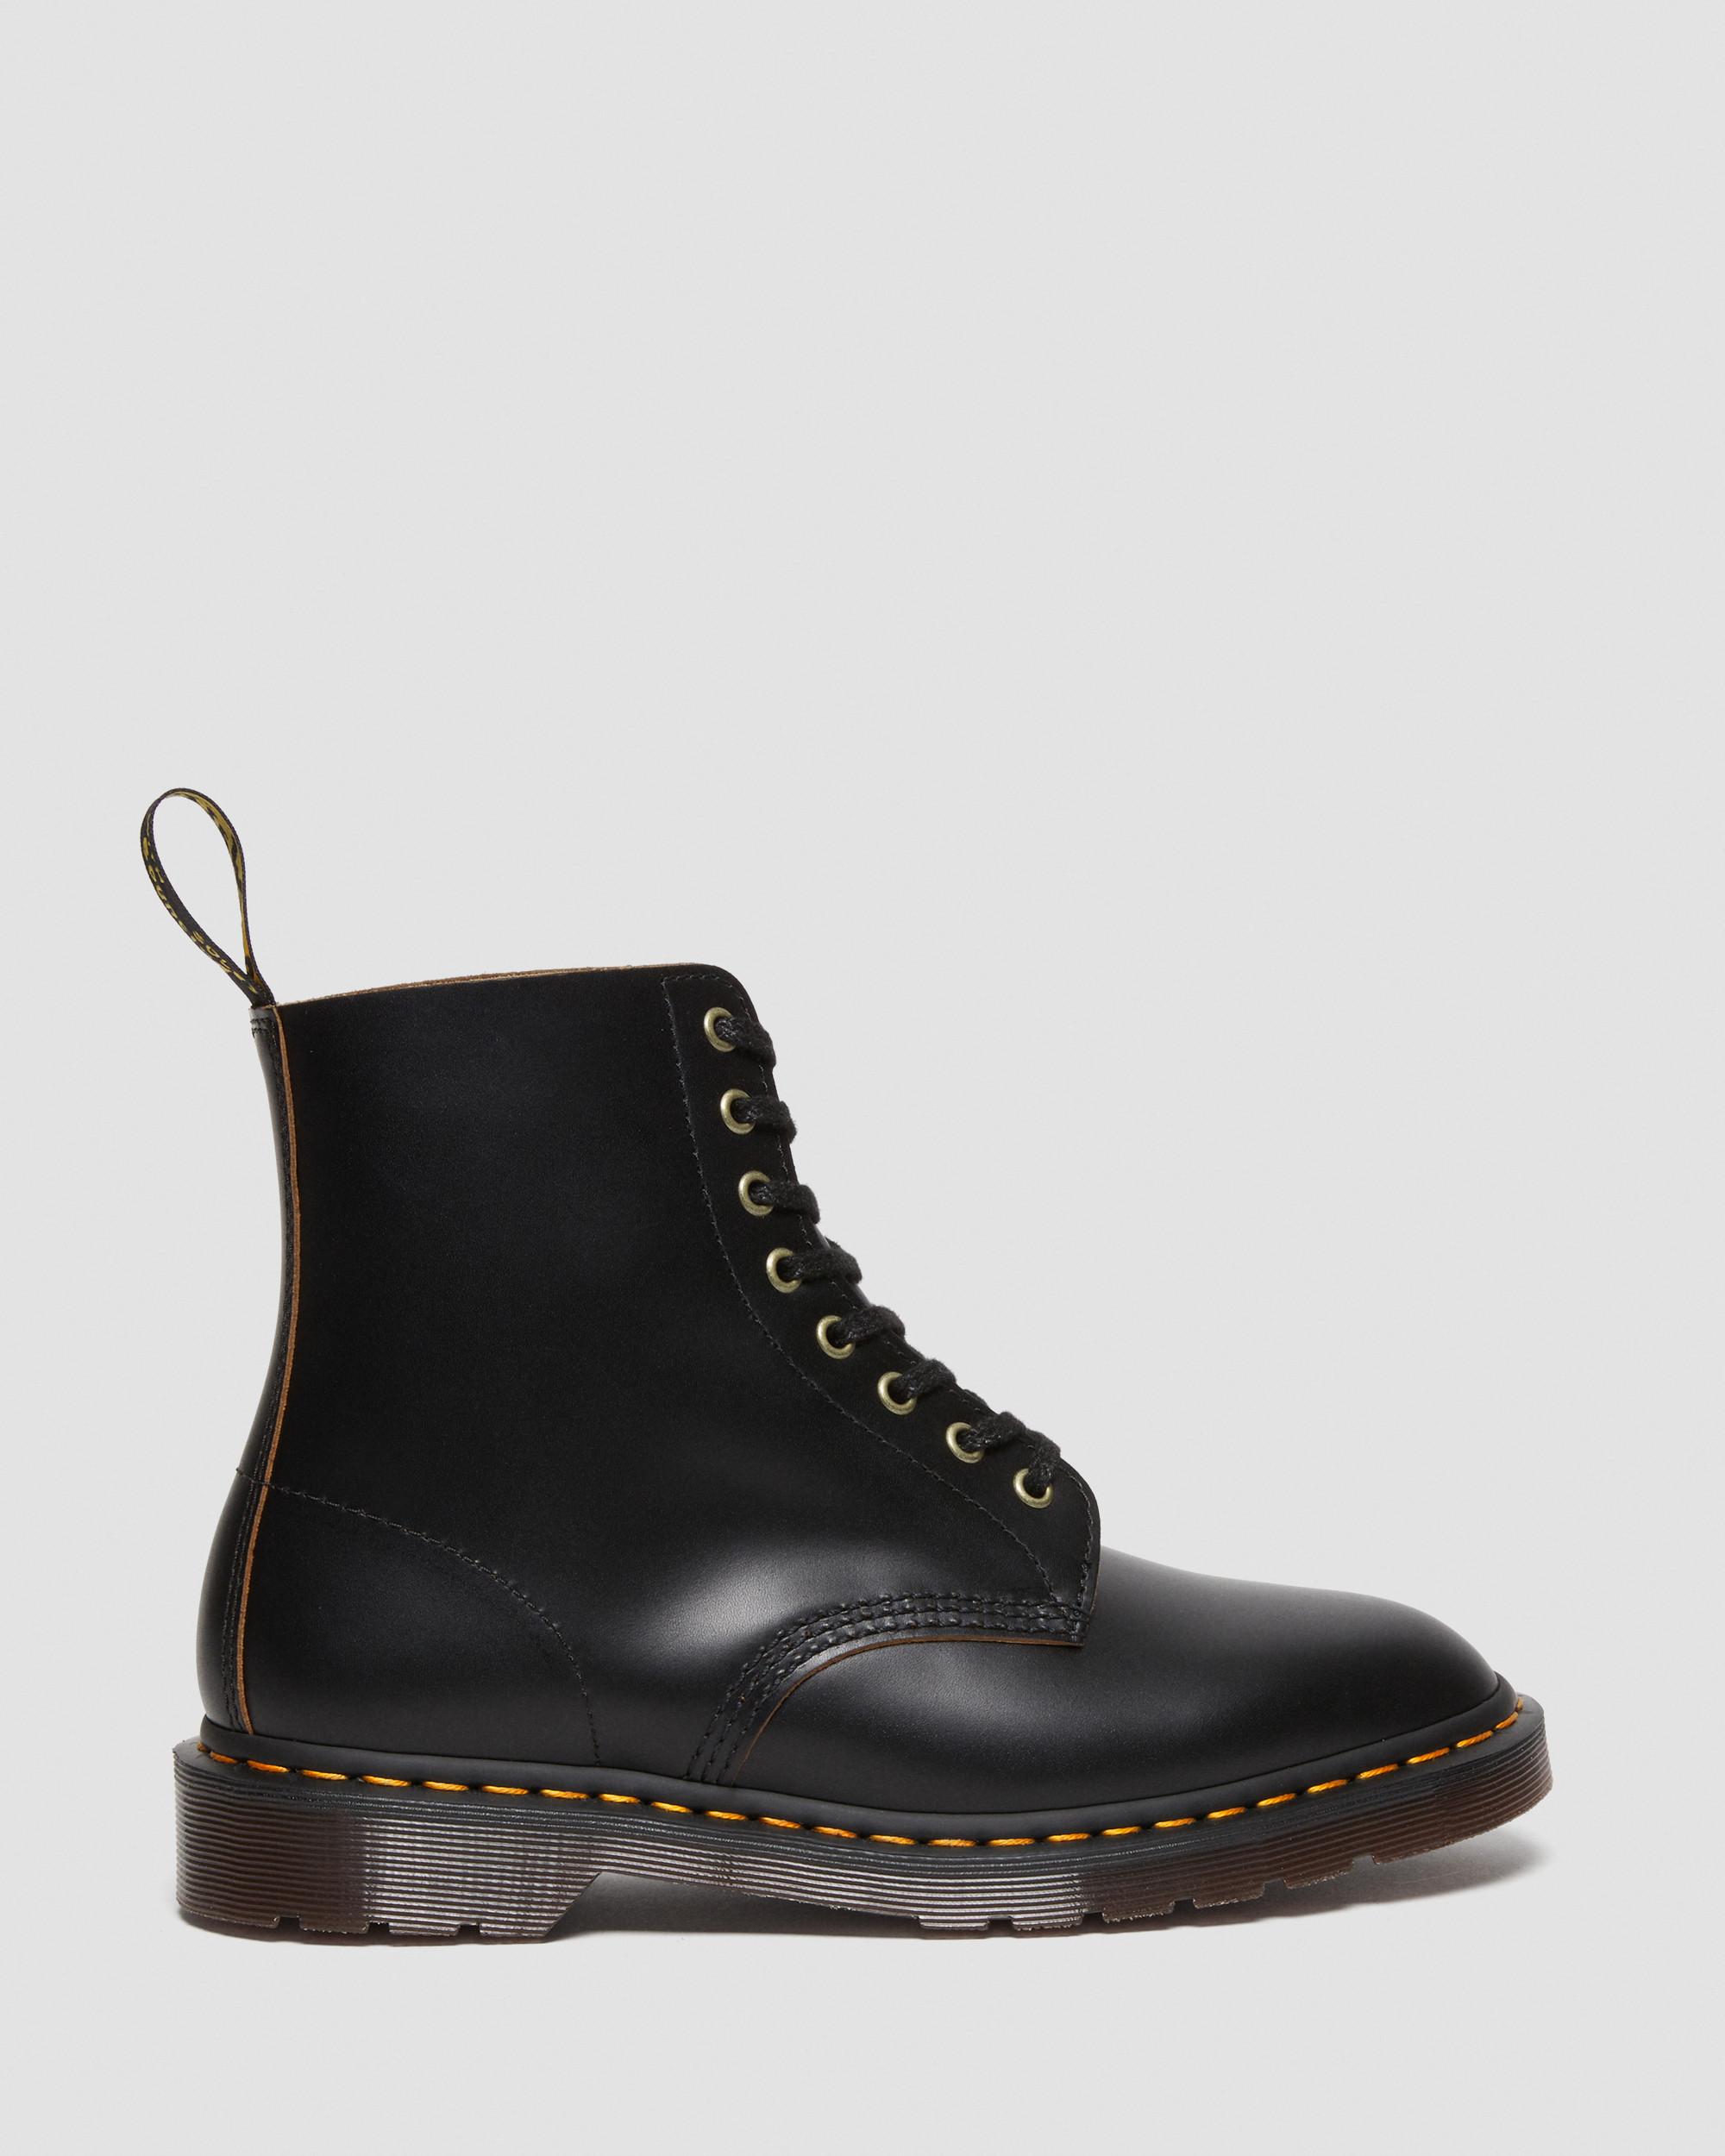 Smiths Vintage Smooth Leather Boots in Black | Dr. Martens